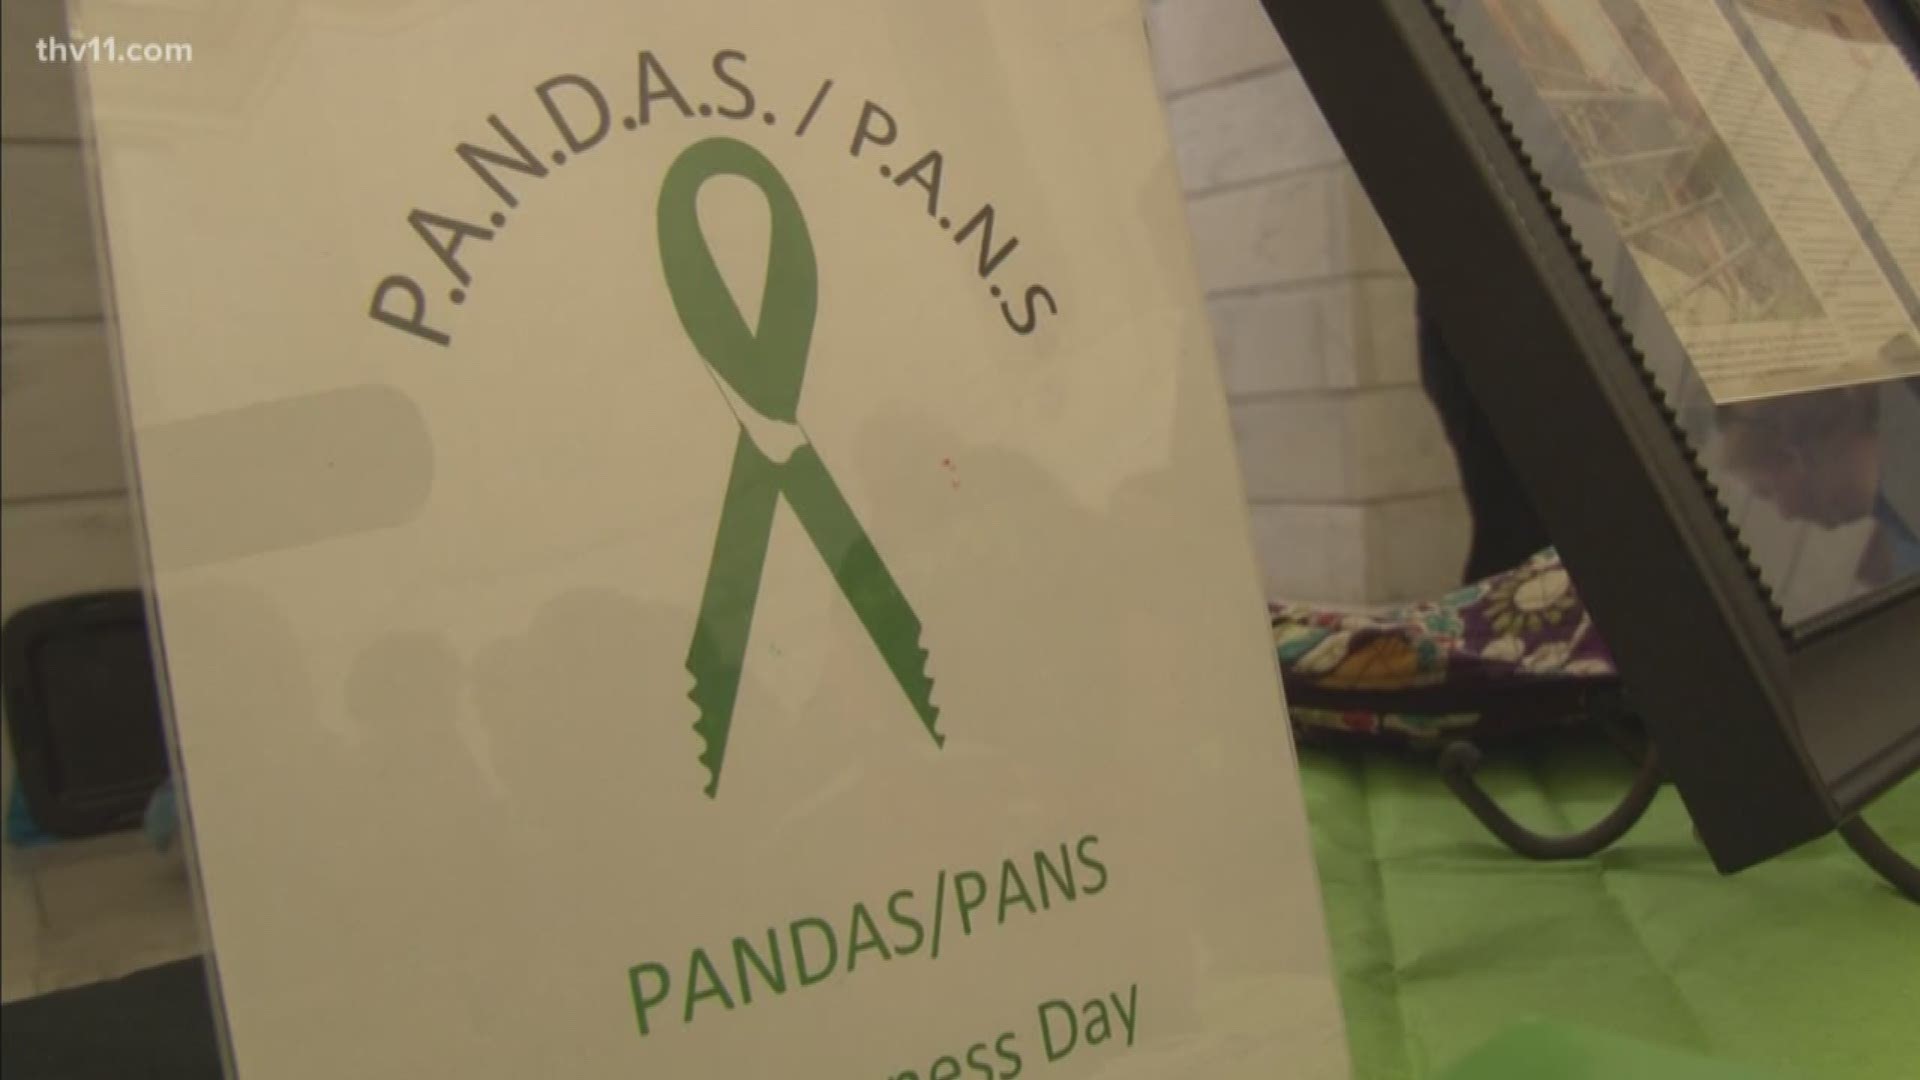 Today is the second annual PANS/PANDAS Syndrome Awareness Day here in Arkansas. 